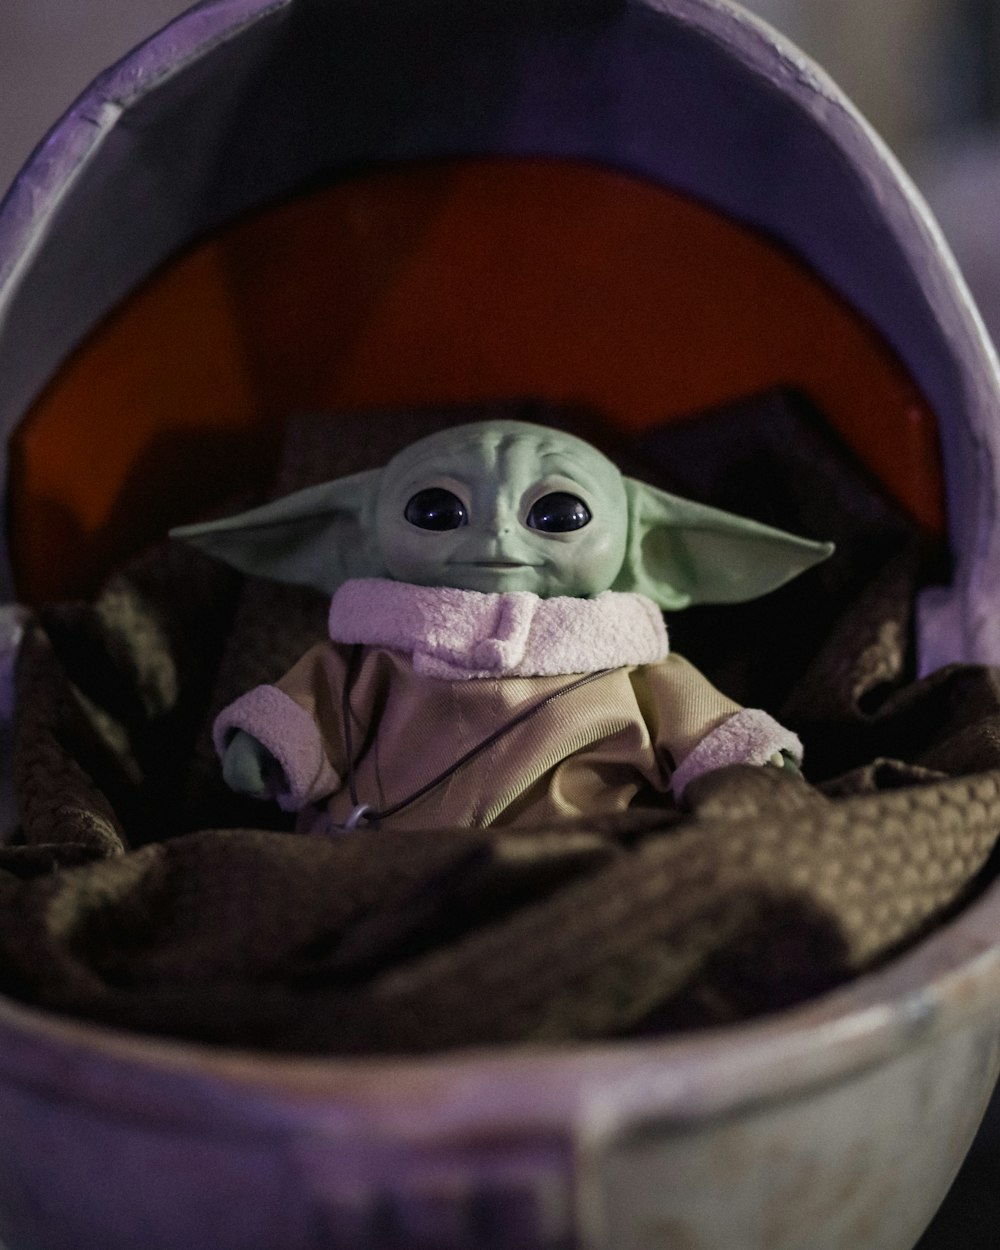 a baby yoda doll sitting inside of a purple container